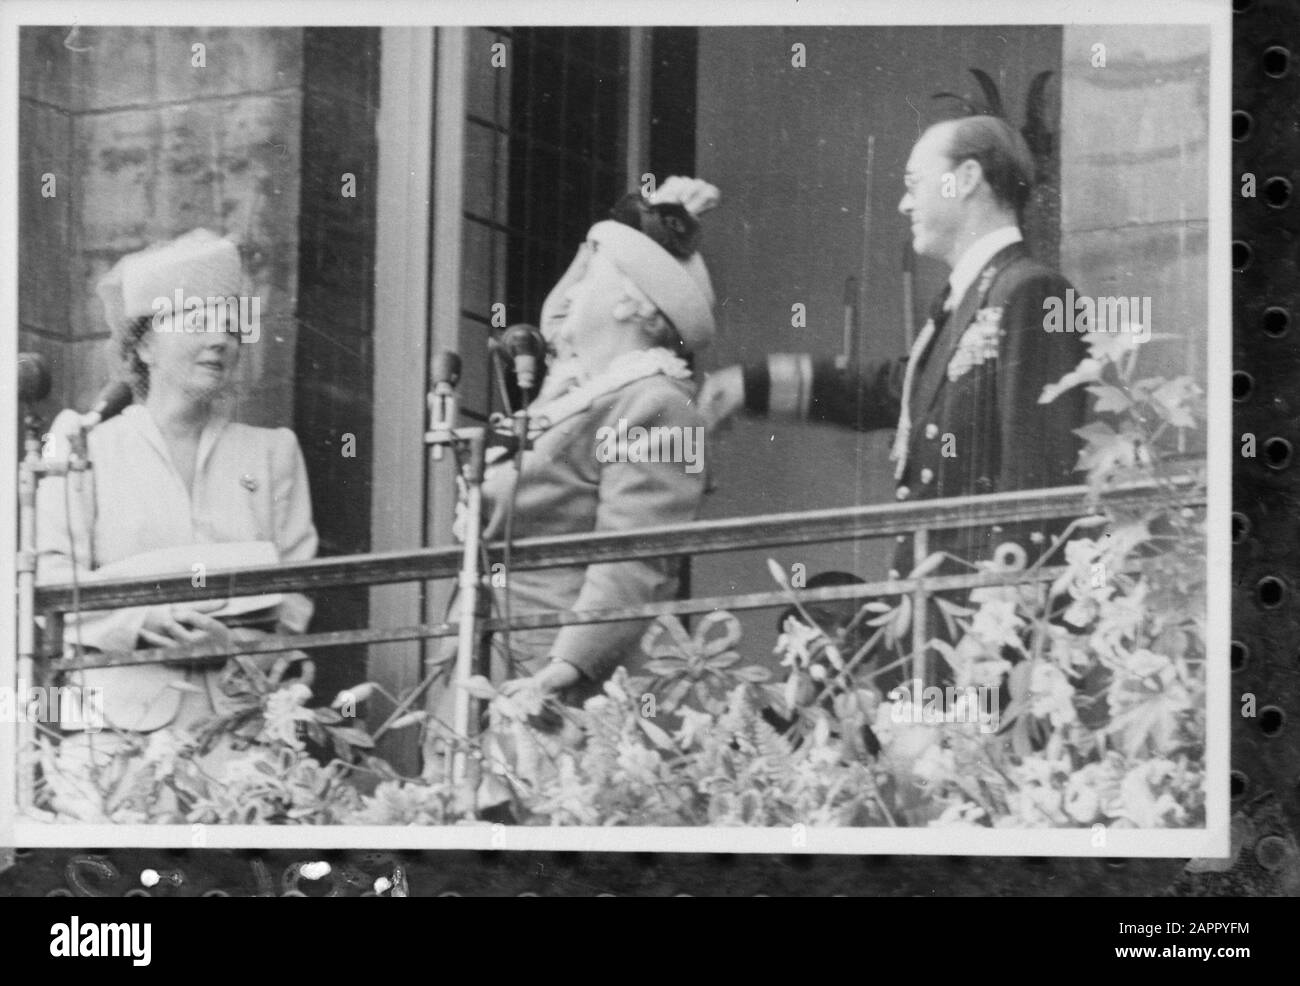 abdication Queen Wilhelmina/Inauguration of Queen Juliana  abdication Queen Wilhelmina. Announcement of Wilhelmina on balcony Palace on Dam Square; Long live our Queen! Date: 4 September 1948 Location: Amsterdam, Noord-Holland Keywords: abdications, queens, royal house Personal name: Bernhard, prince, Juliana, queen, Wilhelmina, princess Stock Photo